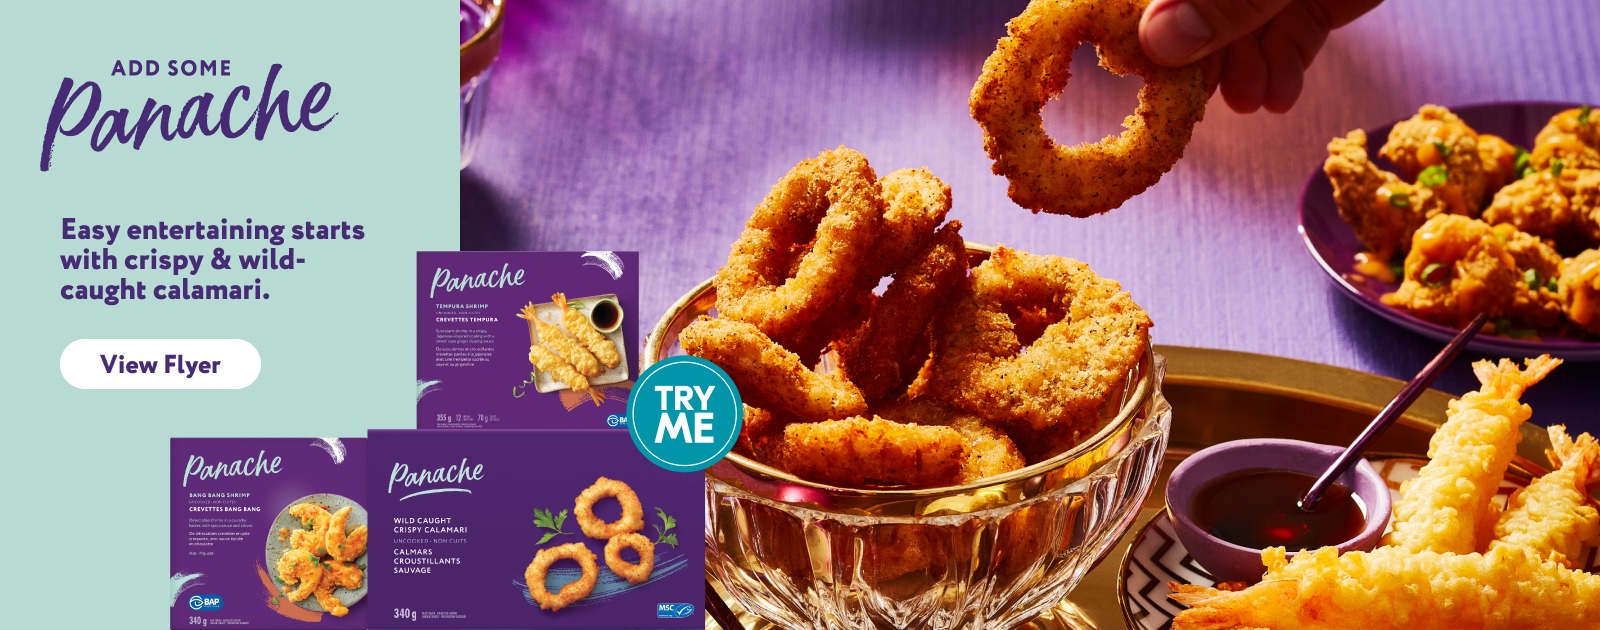 The following image consists of Calamari in bowls with text, " Add some Panache, Easy entertaining starts with crispy & wild-caught calamari" written on it.